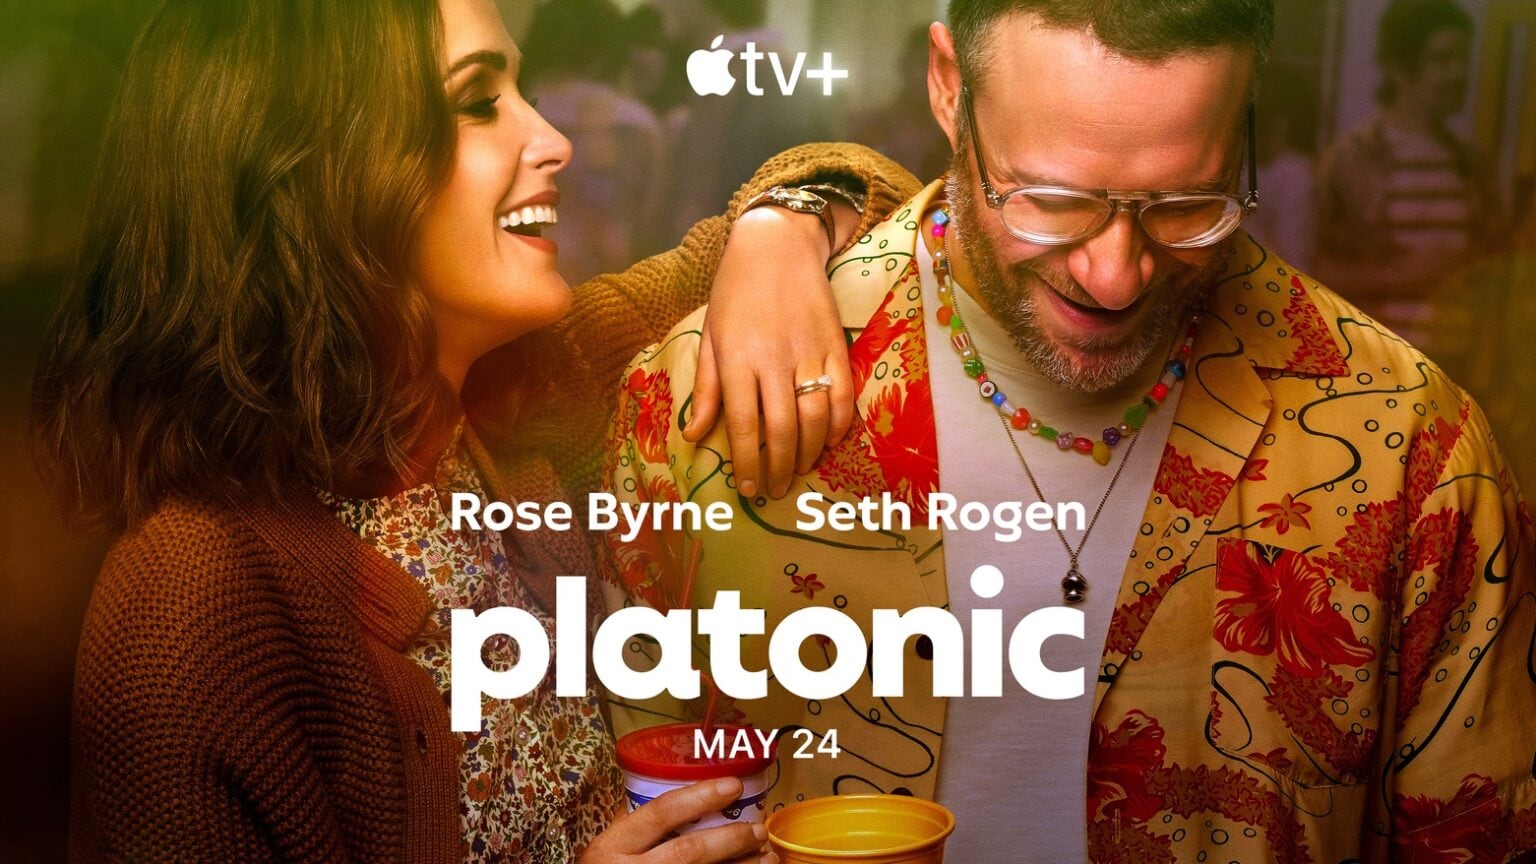 Rose Byrne and Seth Rogen are hilarious disasters in Apple TV+ comedy 'Platonic' trailer